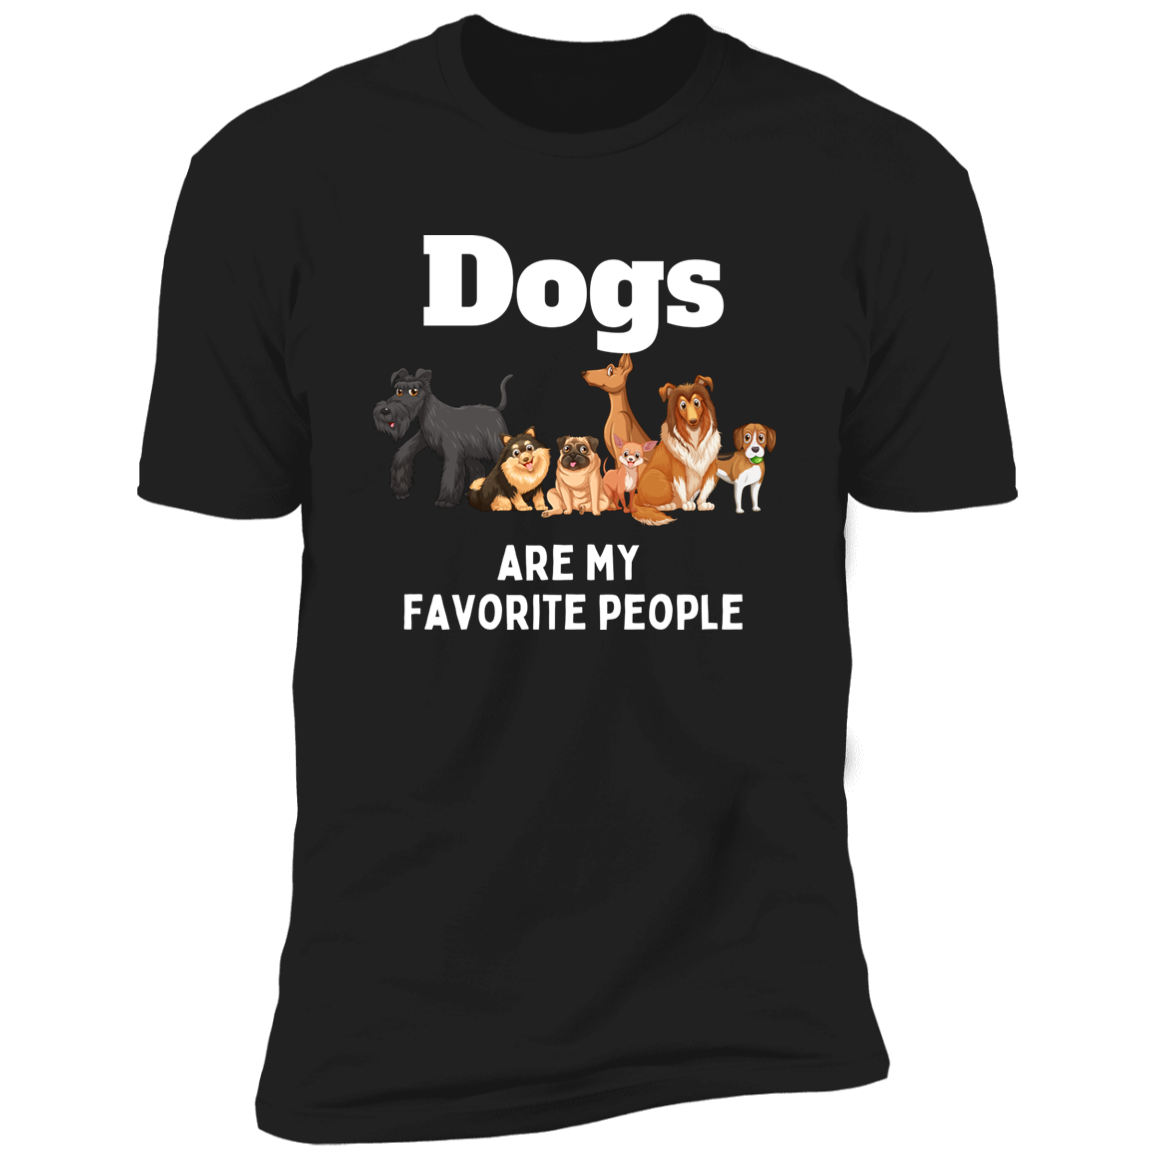 Dogs Are My Favorite People t-shirt, dog shirt for humans, in black